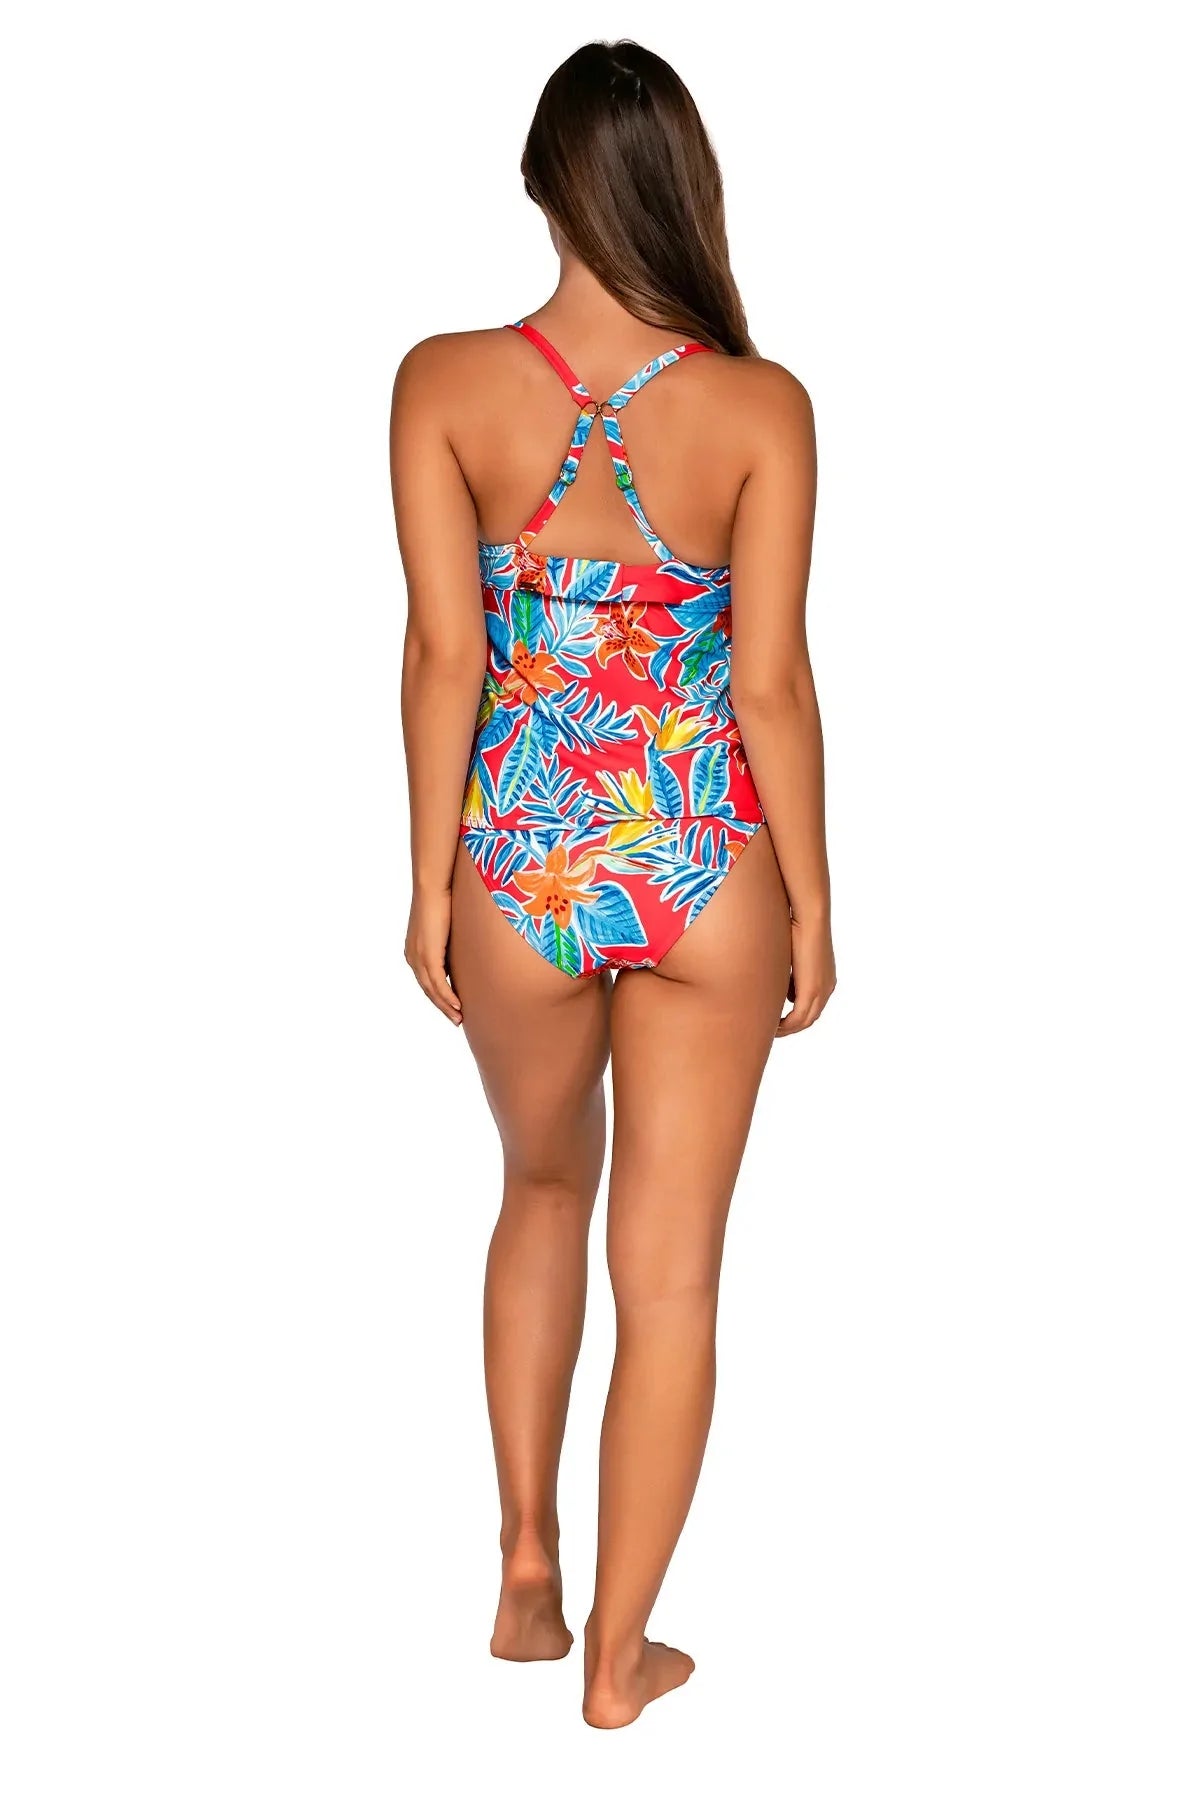 Sunsets Escape "Brands,Swimwear" Sunsets Tiger Lily Maeve Tankini